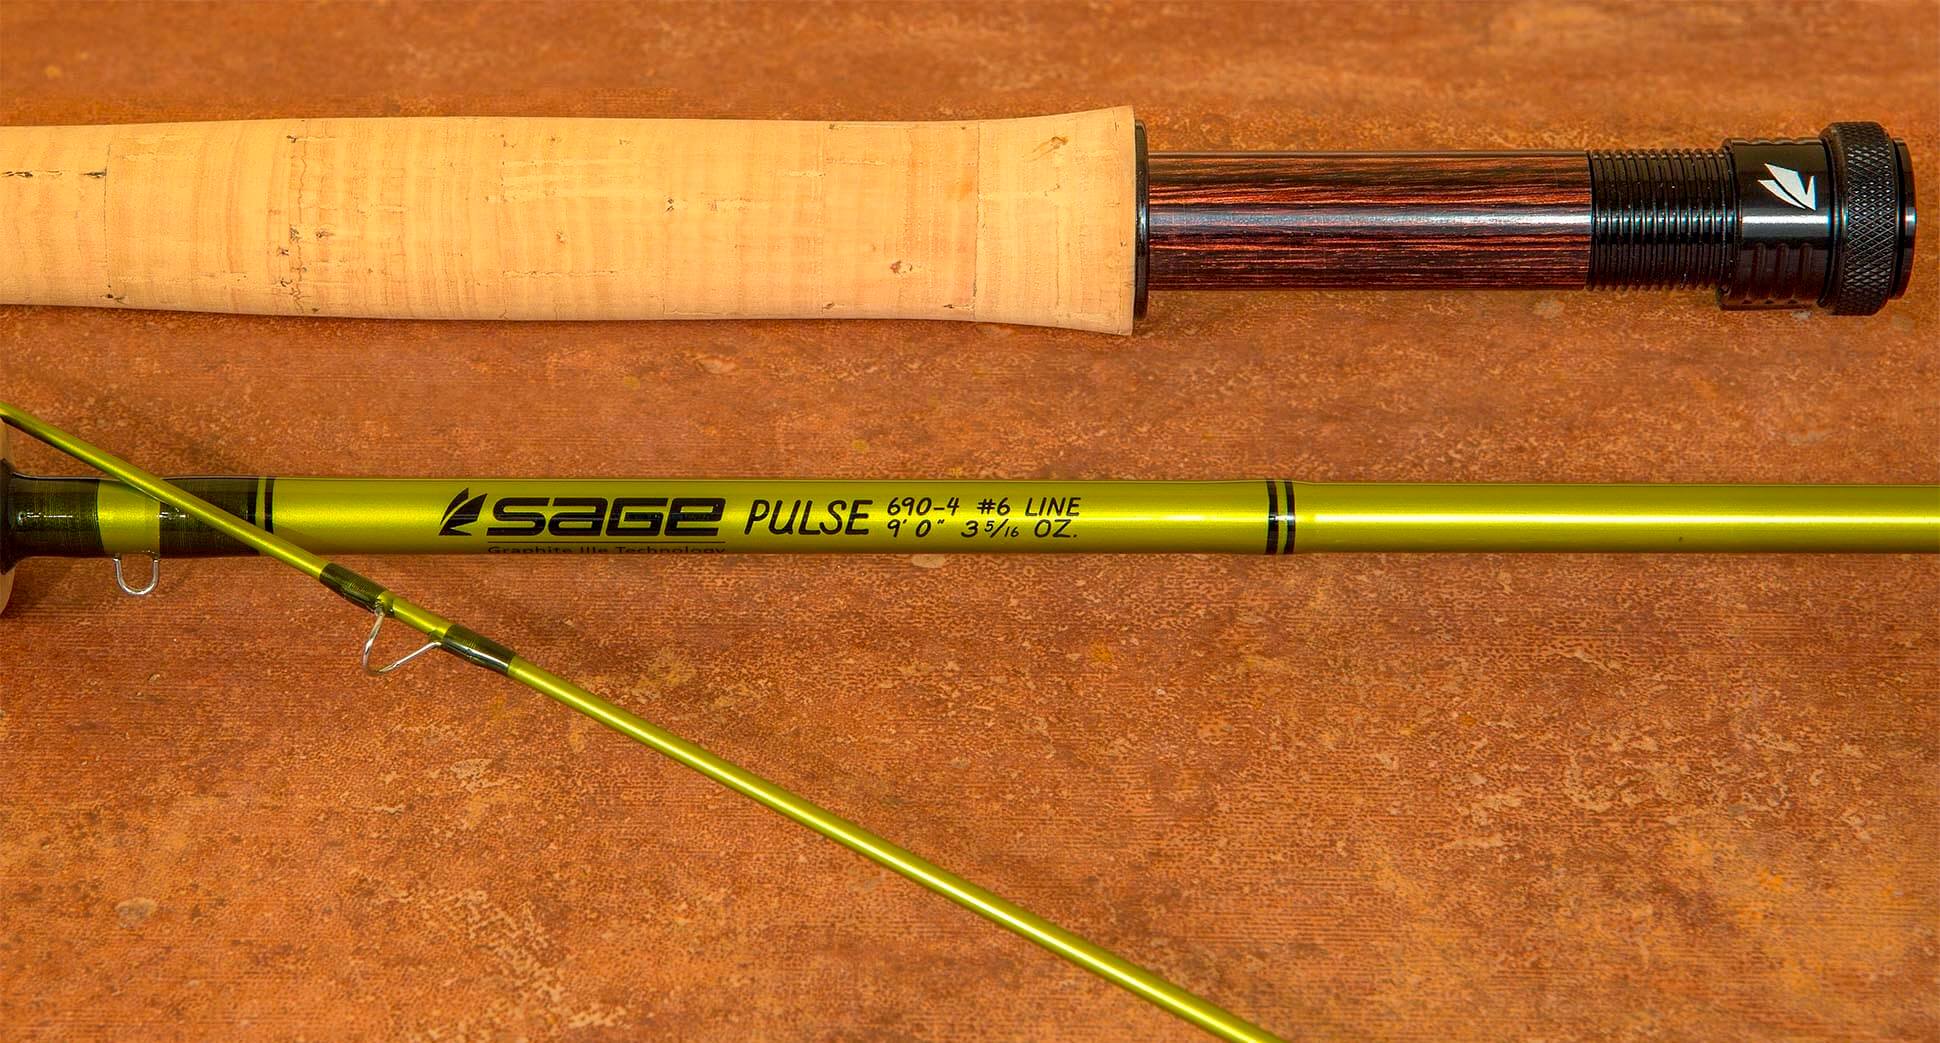 The Sage Pulse offers much more than its modest price.